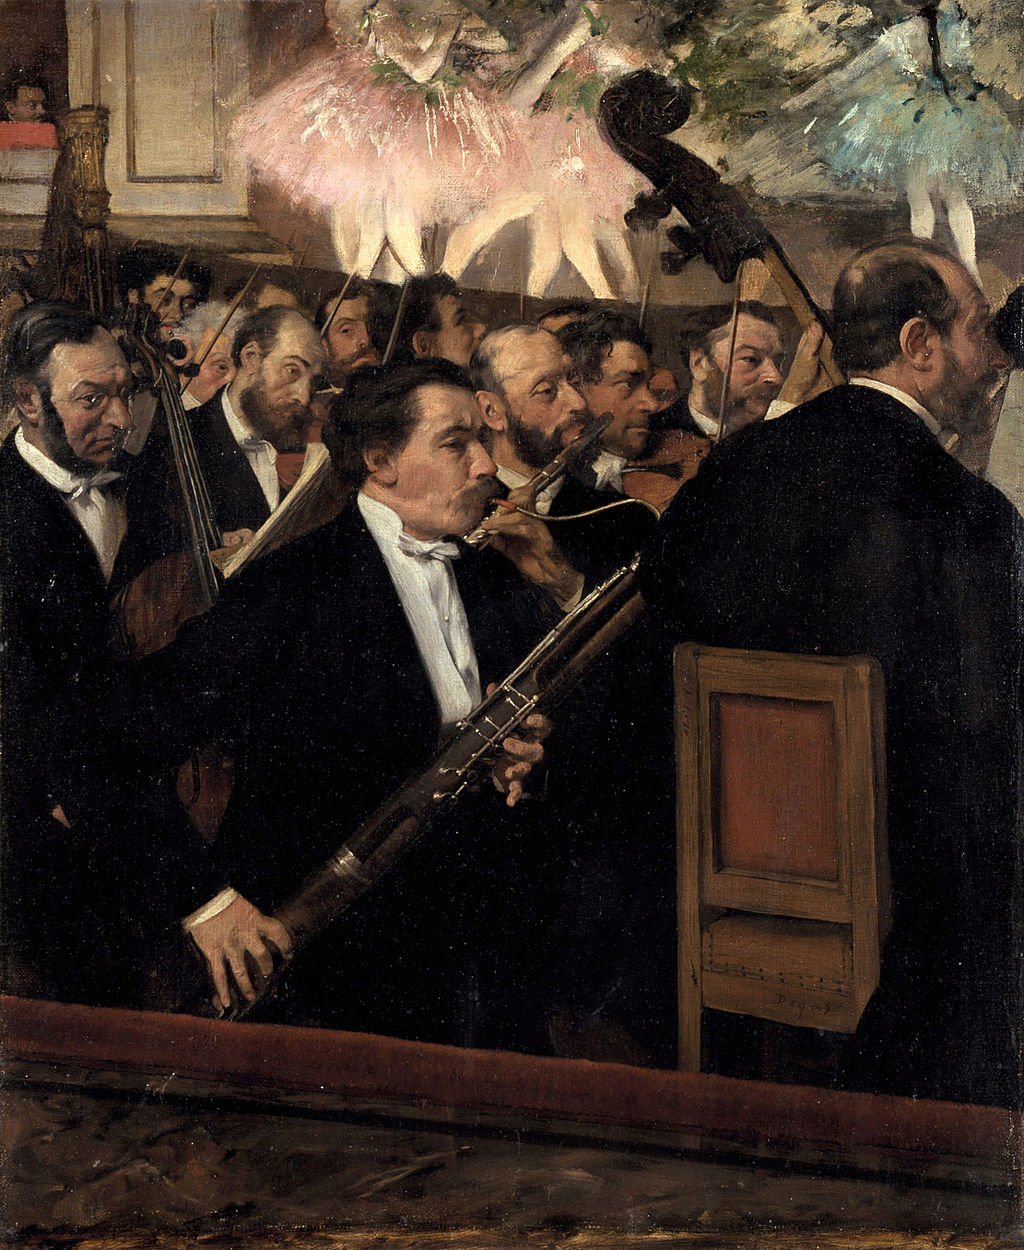 The Orchestra of the Opera 1870 Edgar Degas Reproduction Oil Painting - Blue Surf Art